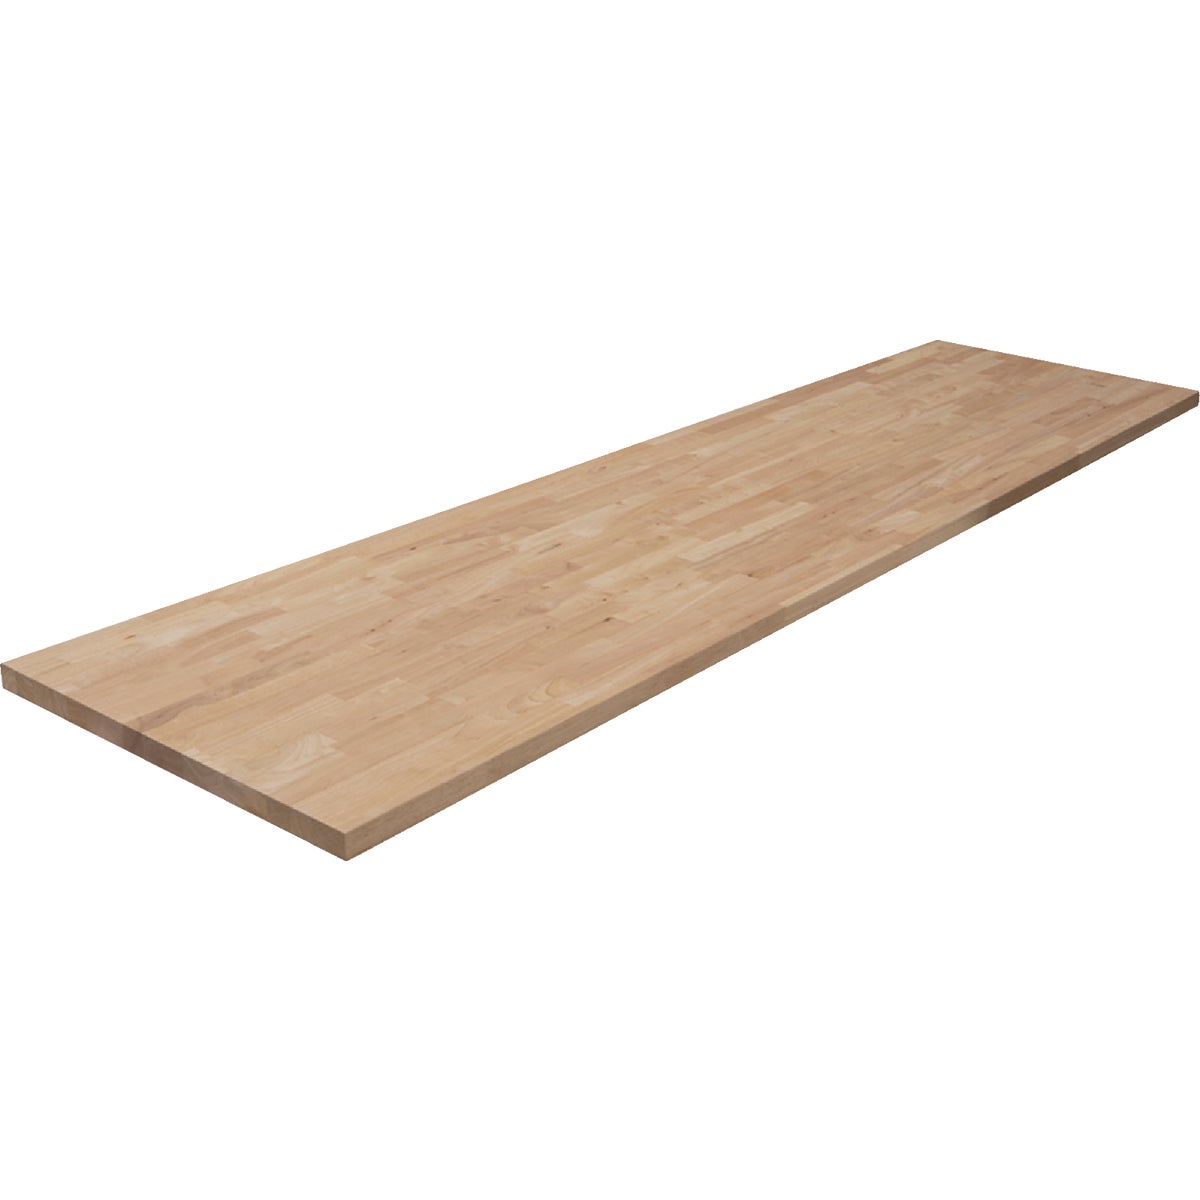 VT Industries CenterPointe 25 In. x 98 In. x 1.5 In. Unfinished Hevea Wood Butcher Block Countertop